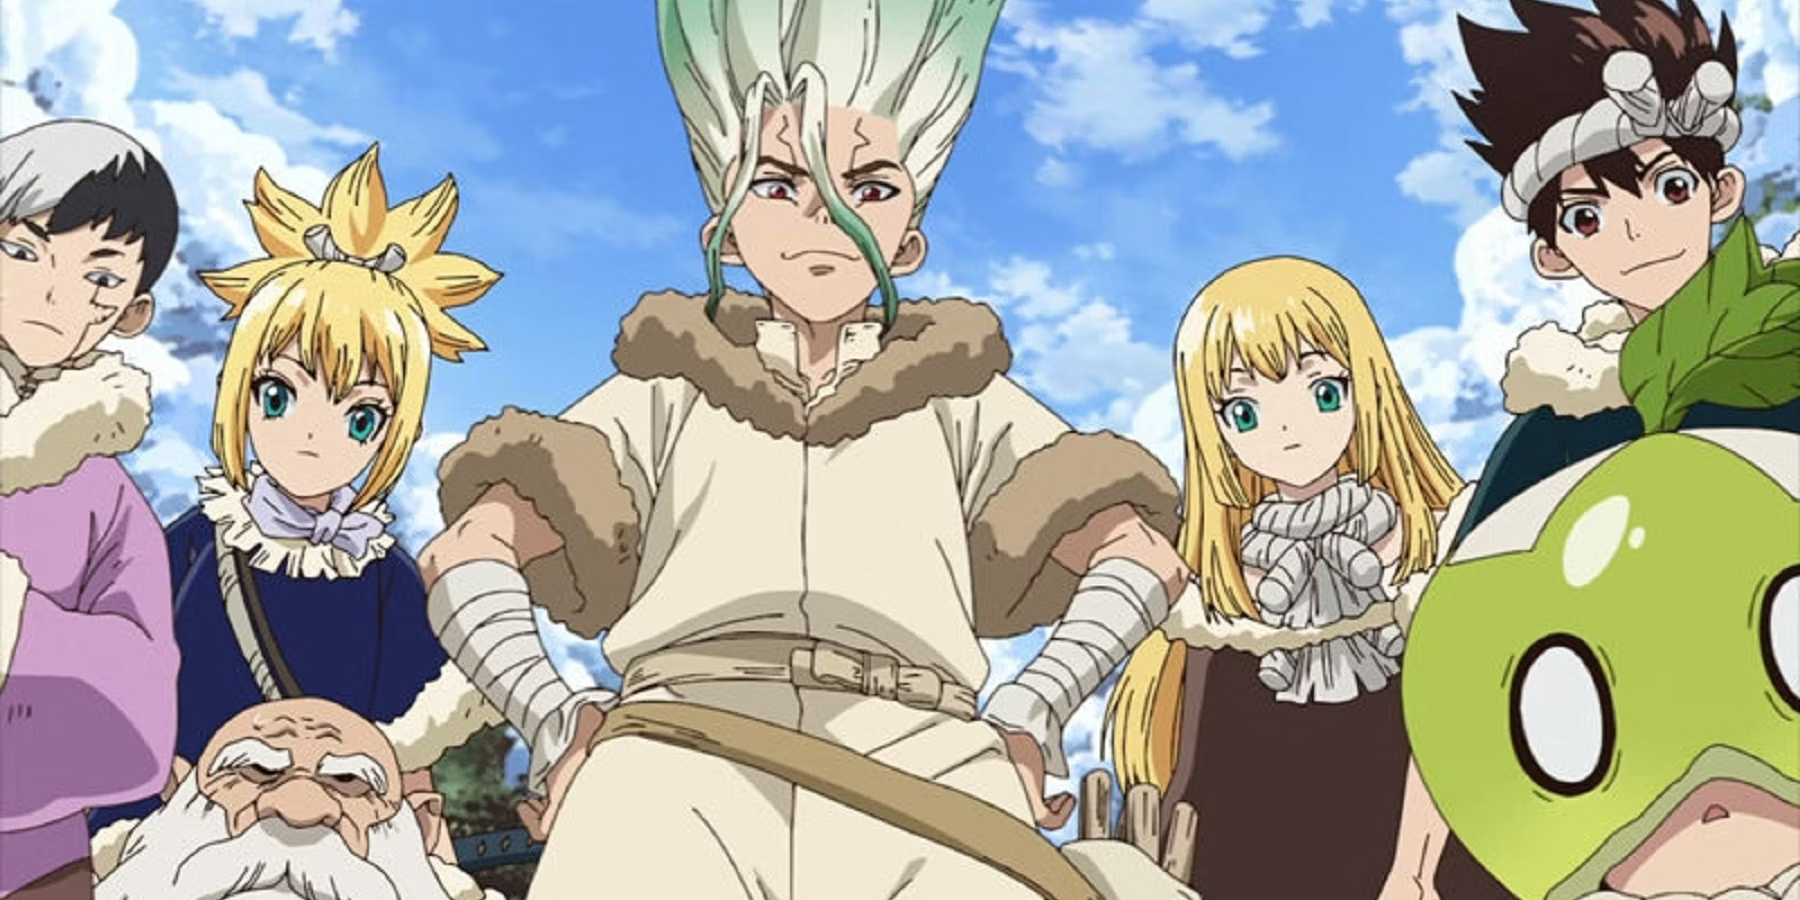 When will Dr. Stone Season 3 Episode 16 be released